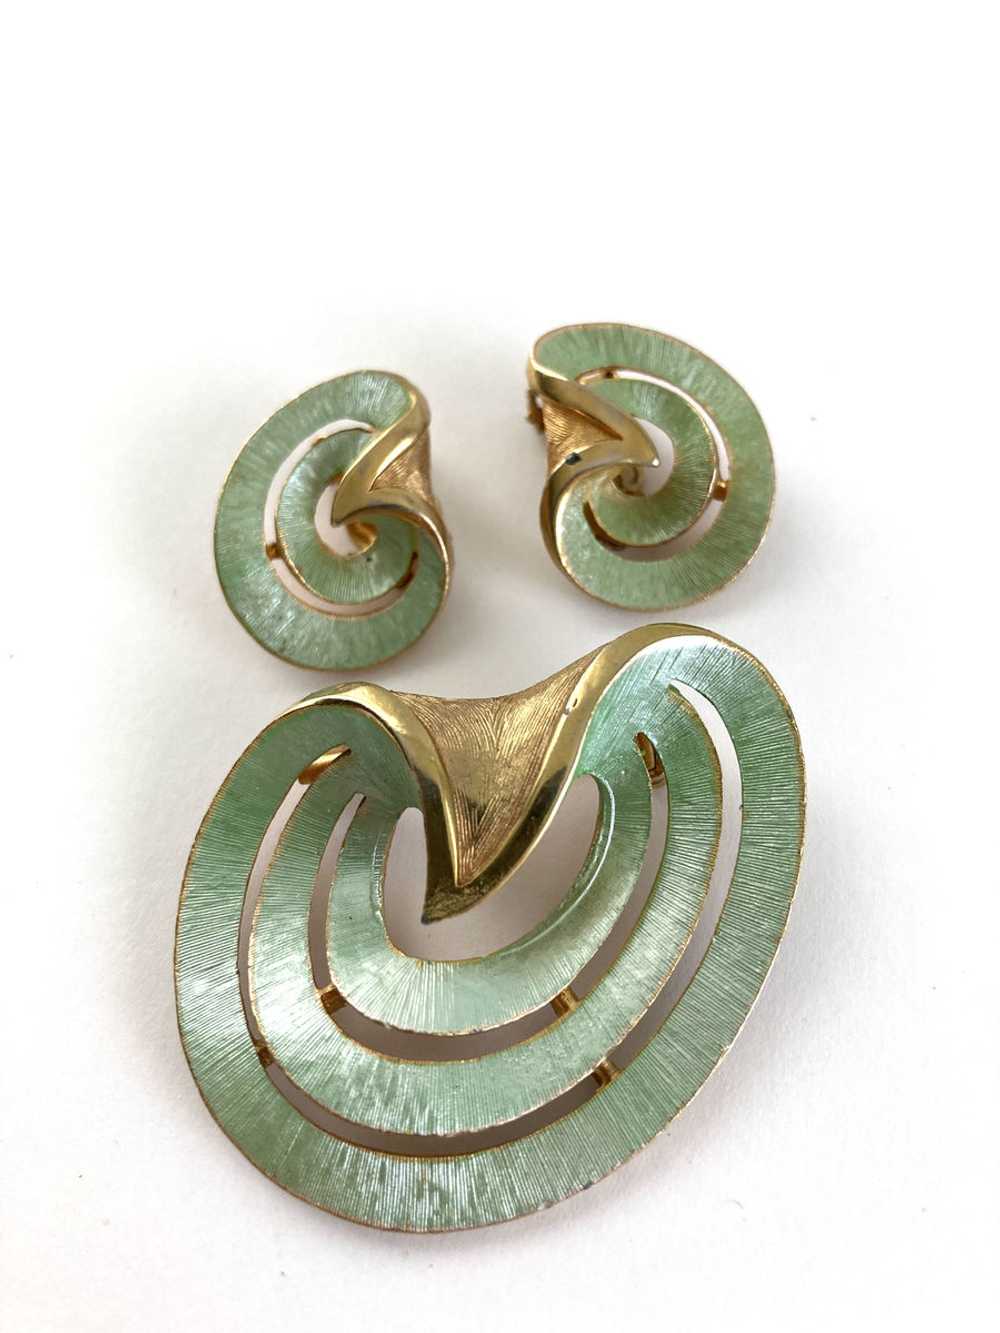 Pale Green & Gold Swirl Brooch and Earrings by JJ - image 3